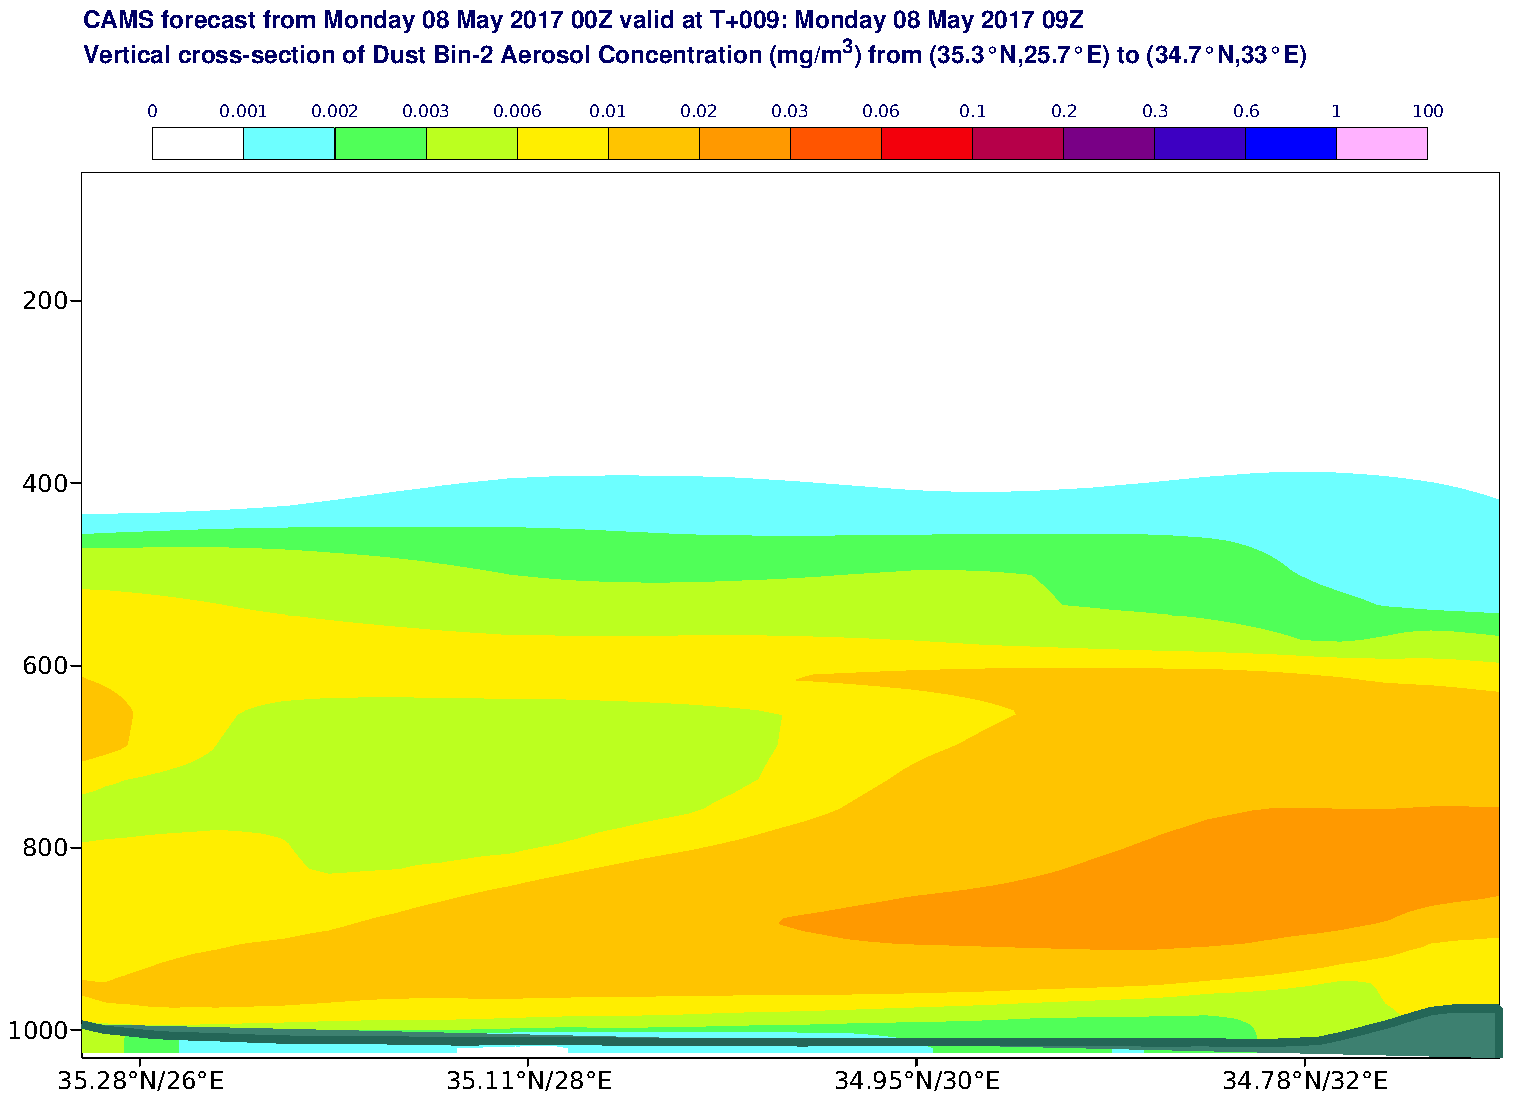 Vertical cross-section of Dust Bin-2 Aerosol Concentration (mg/m3) valid at T9 - 2017-05-08 09:00